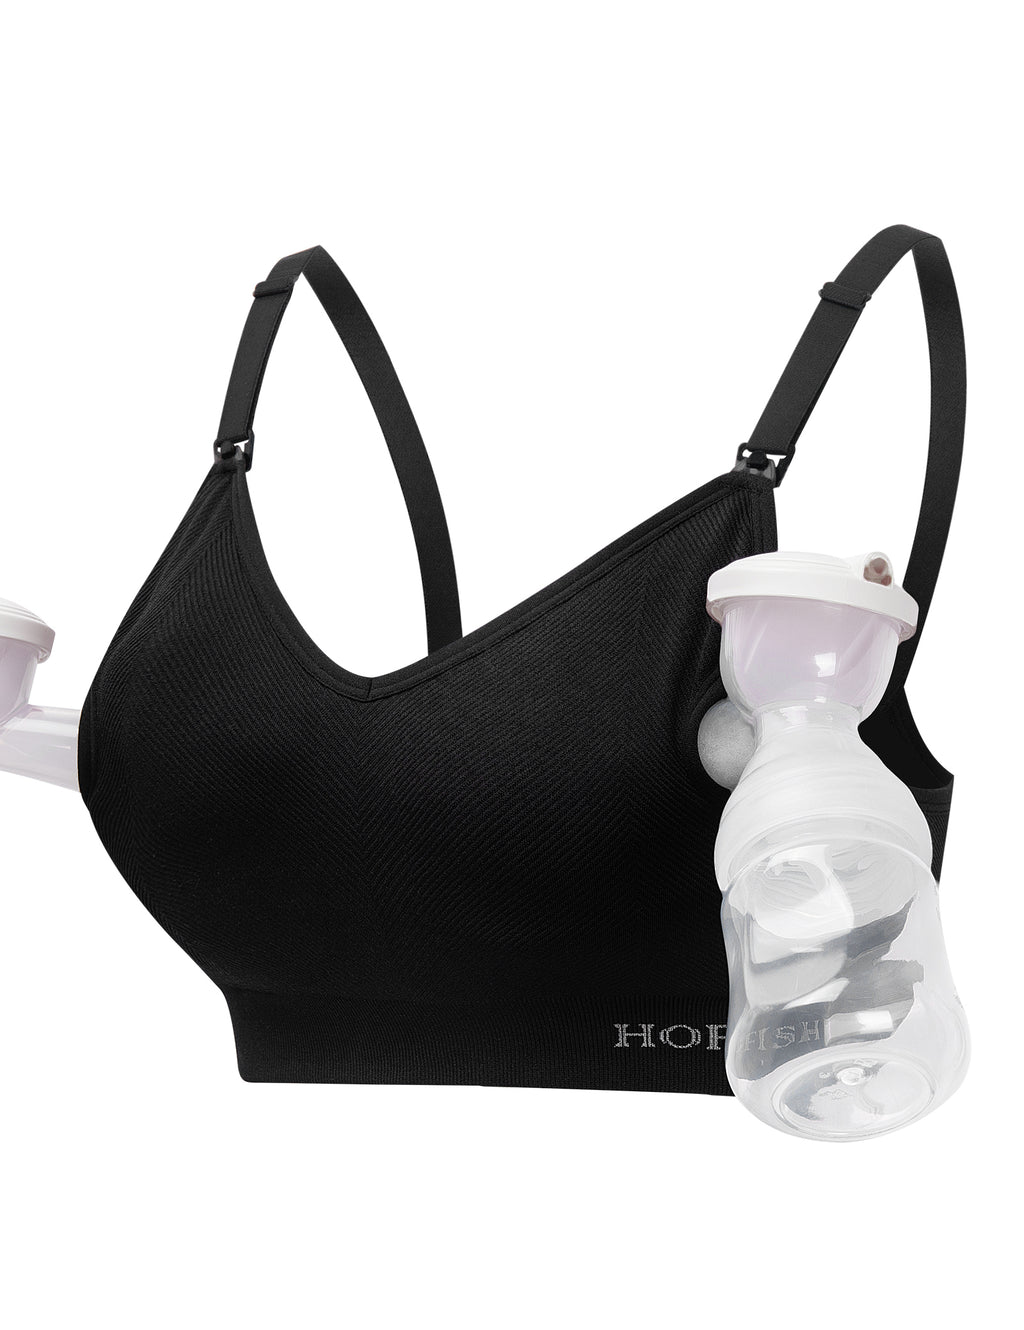 HOFISH Comfortable Hands-Free Pumping Bra for Breastfeeding Moms, All-Day  Support Nursing Bra, Compatible with Most Breast Pump Black/Dblue S :  : Clothing, Shoes & Accessories